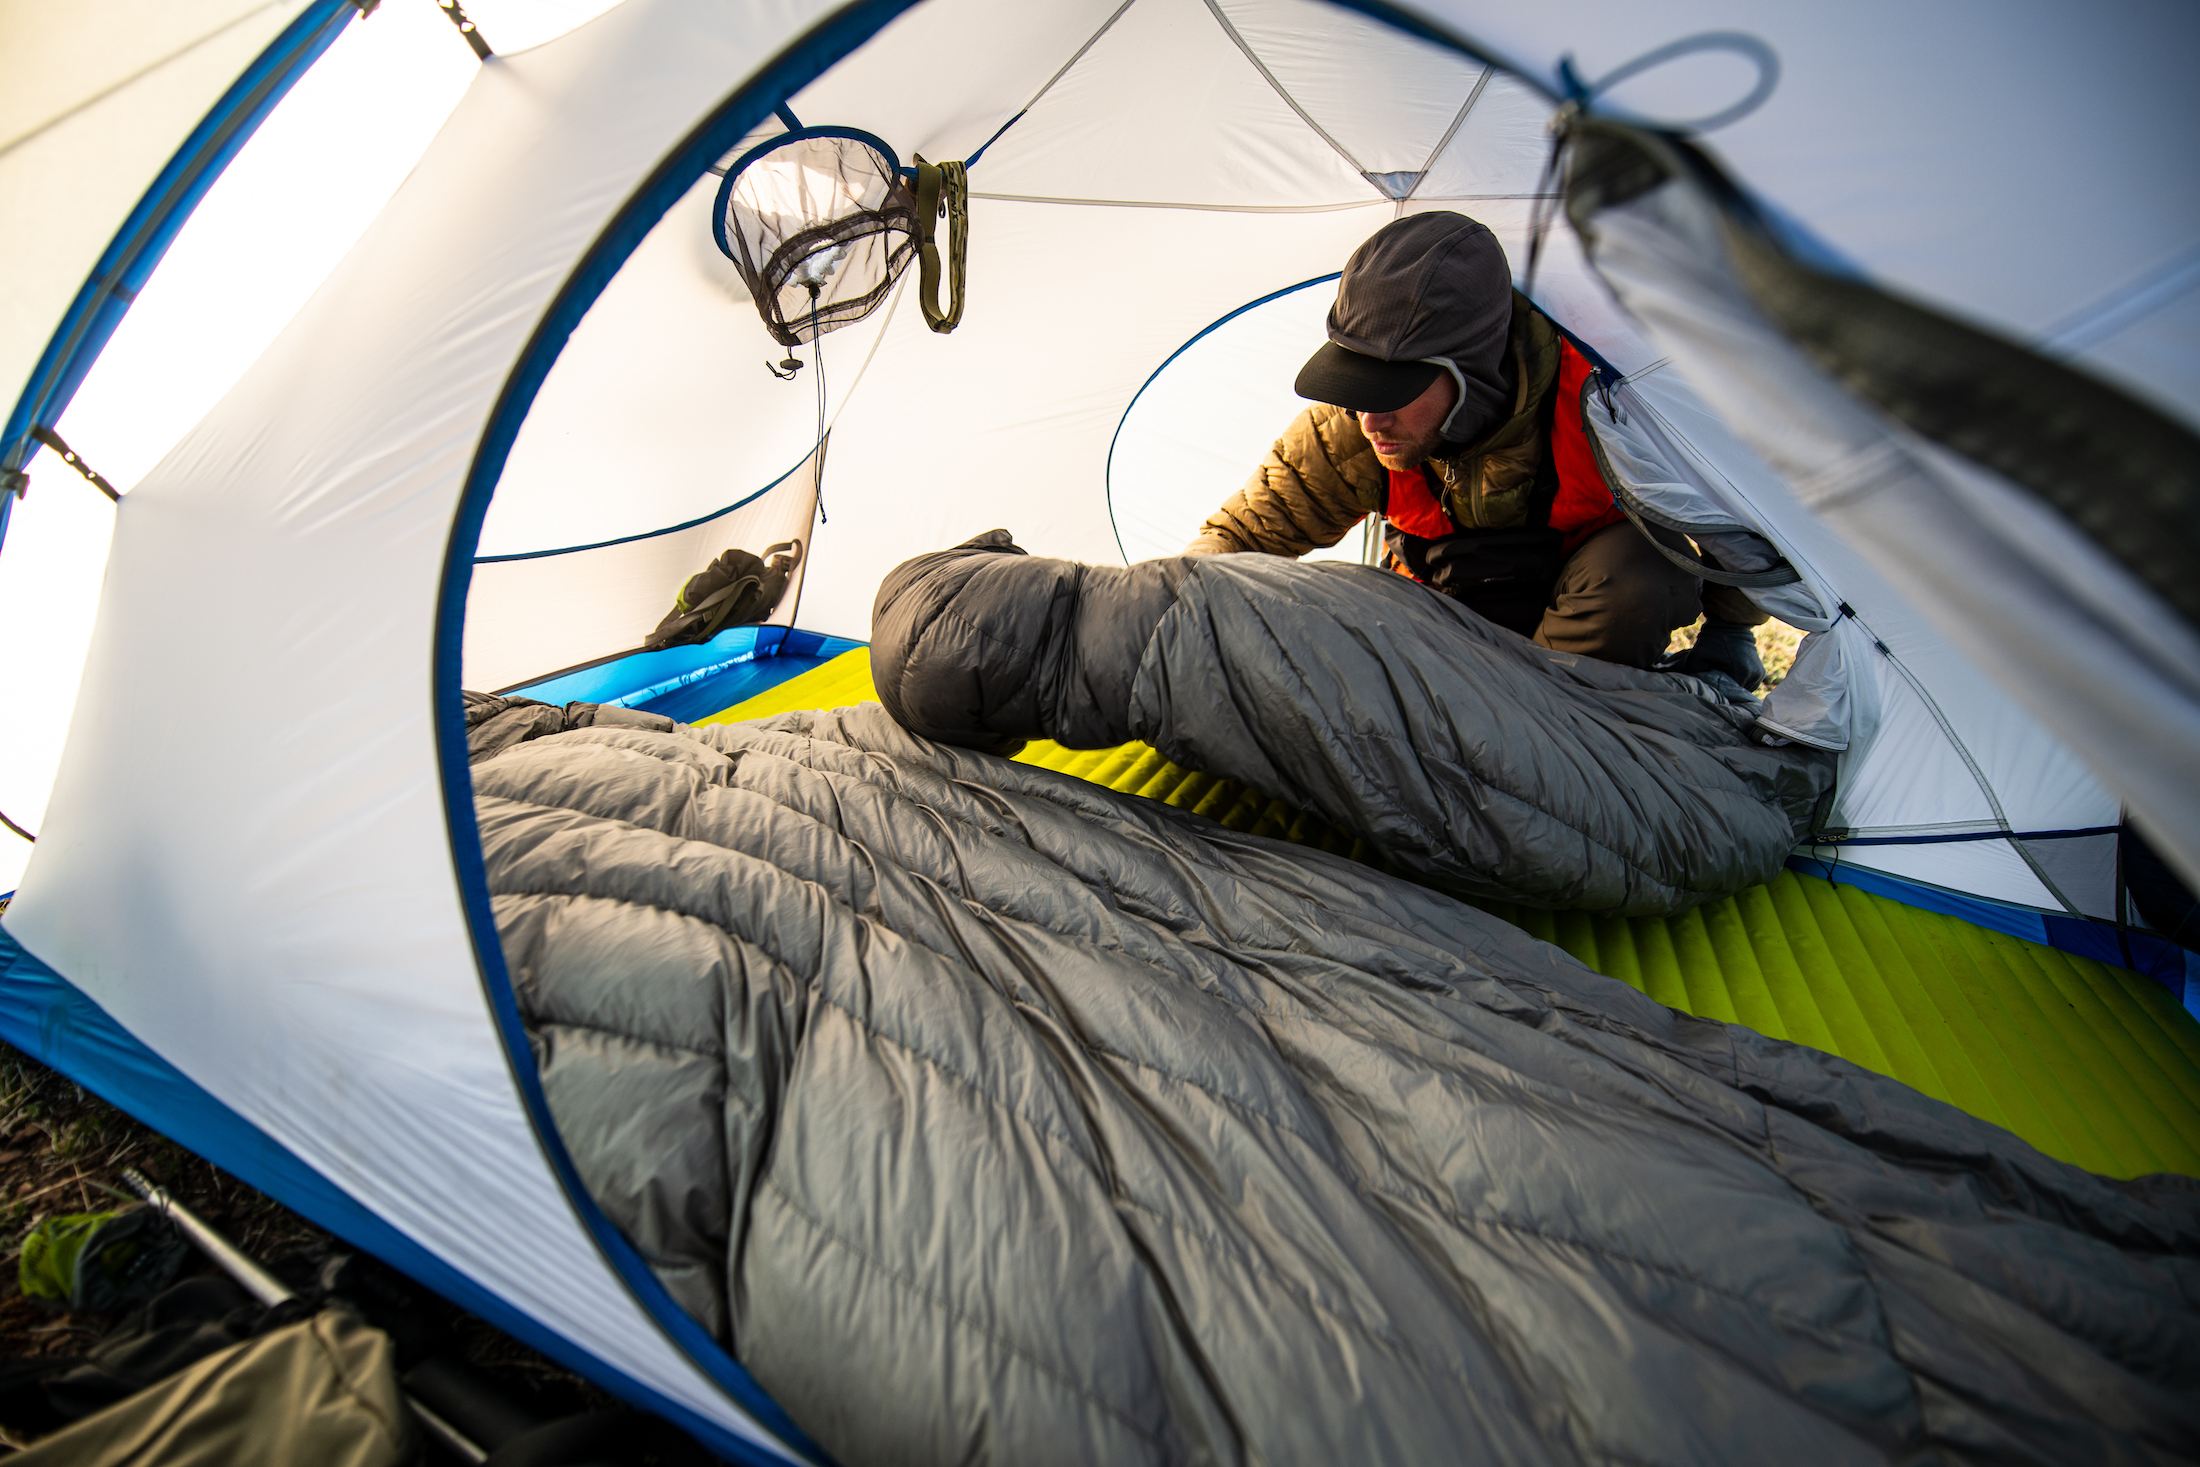 Free Gear Friday: Win a Stone Glacier Chilkoot 15 Sleeping Bag for Backcountry Hunting